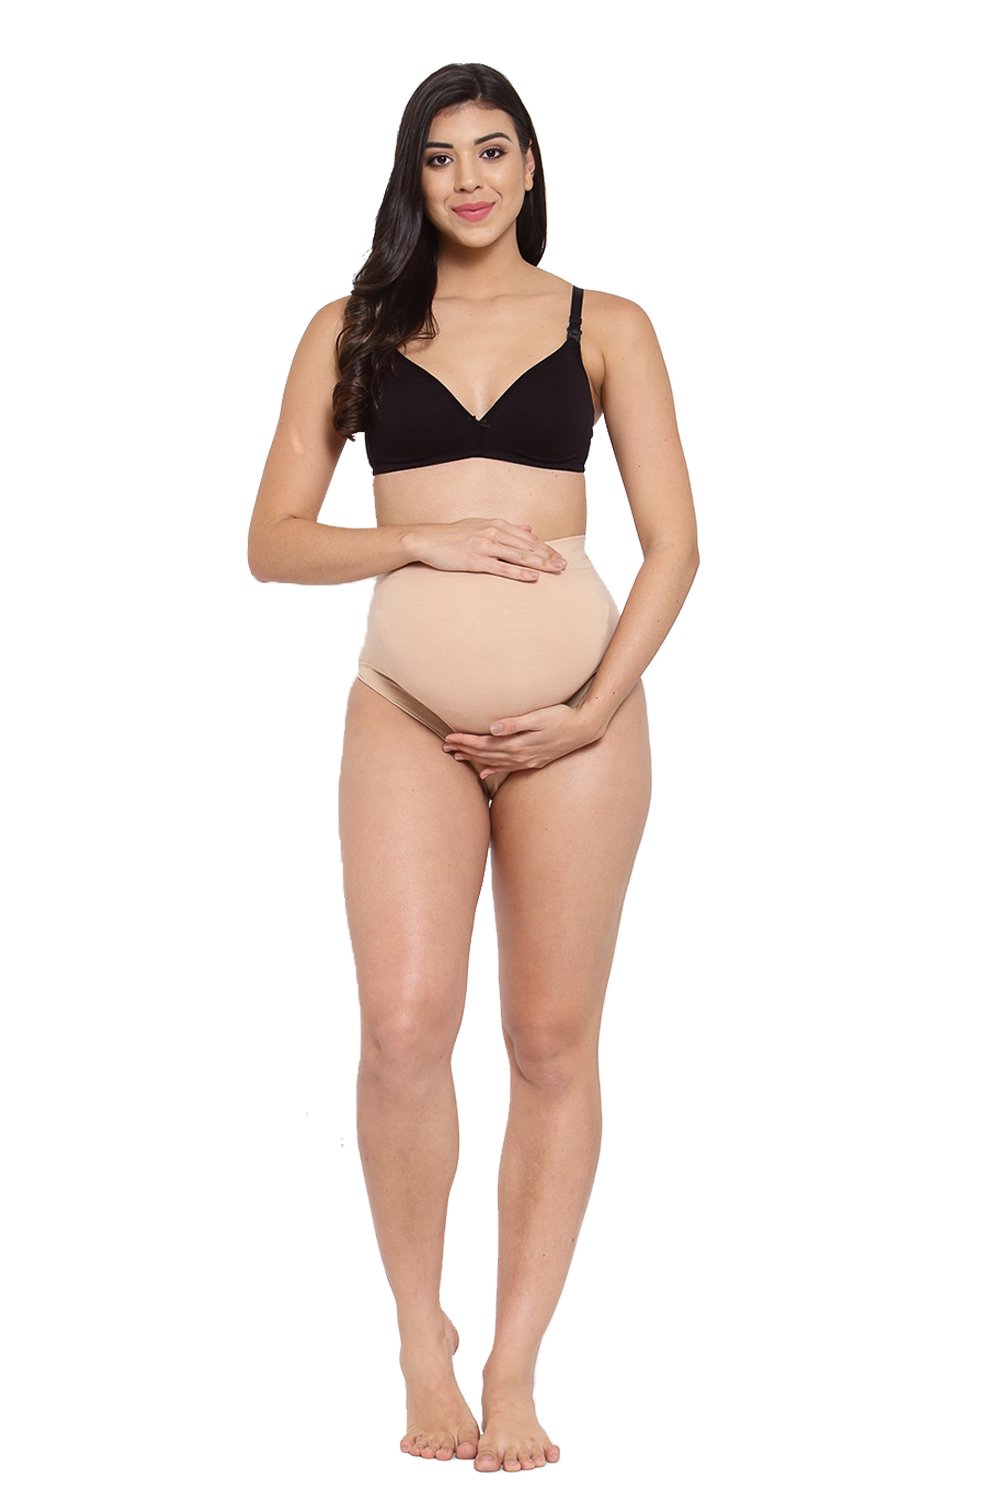 Organic Cotton Antimicrobial Maternity Panty- Pack of 2-IMPC101-Skin_Black